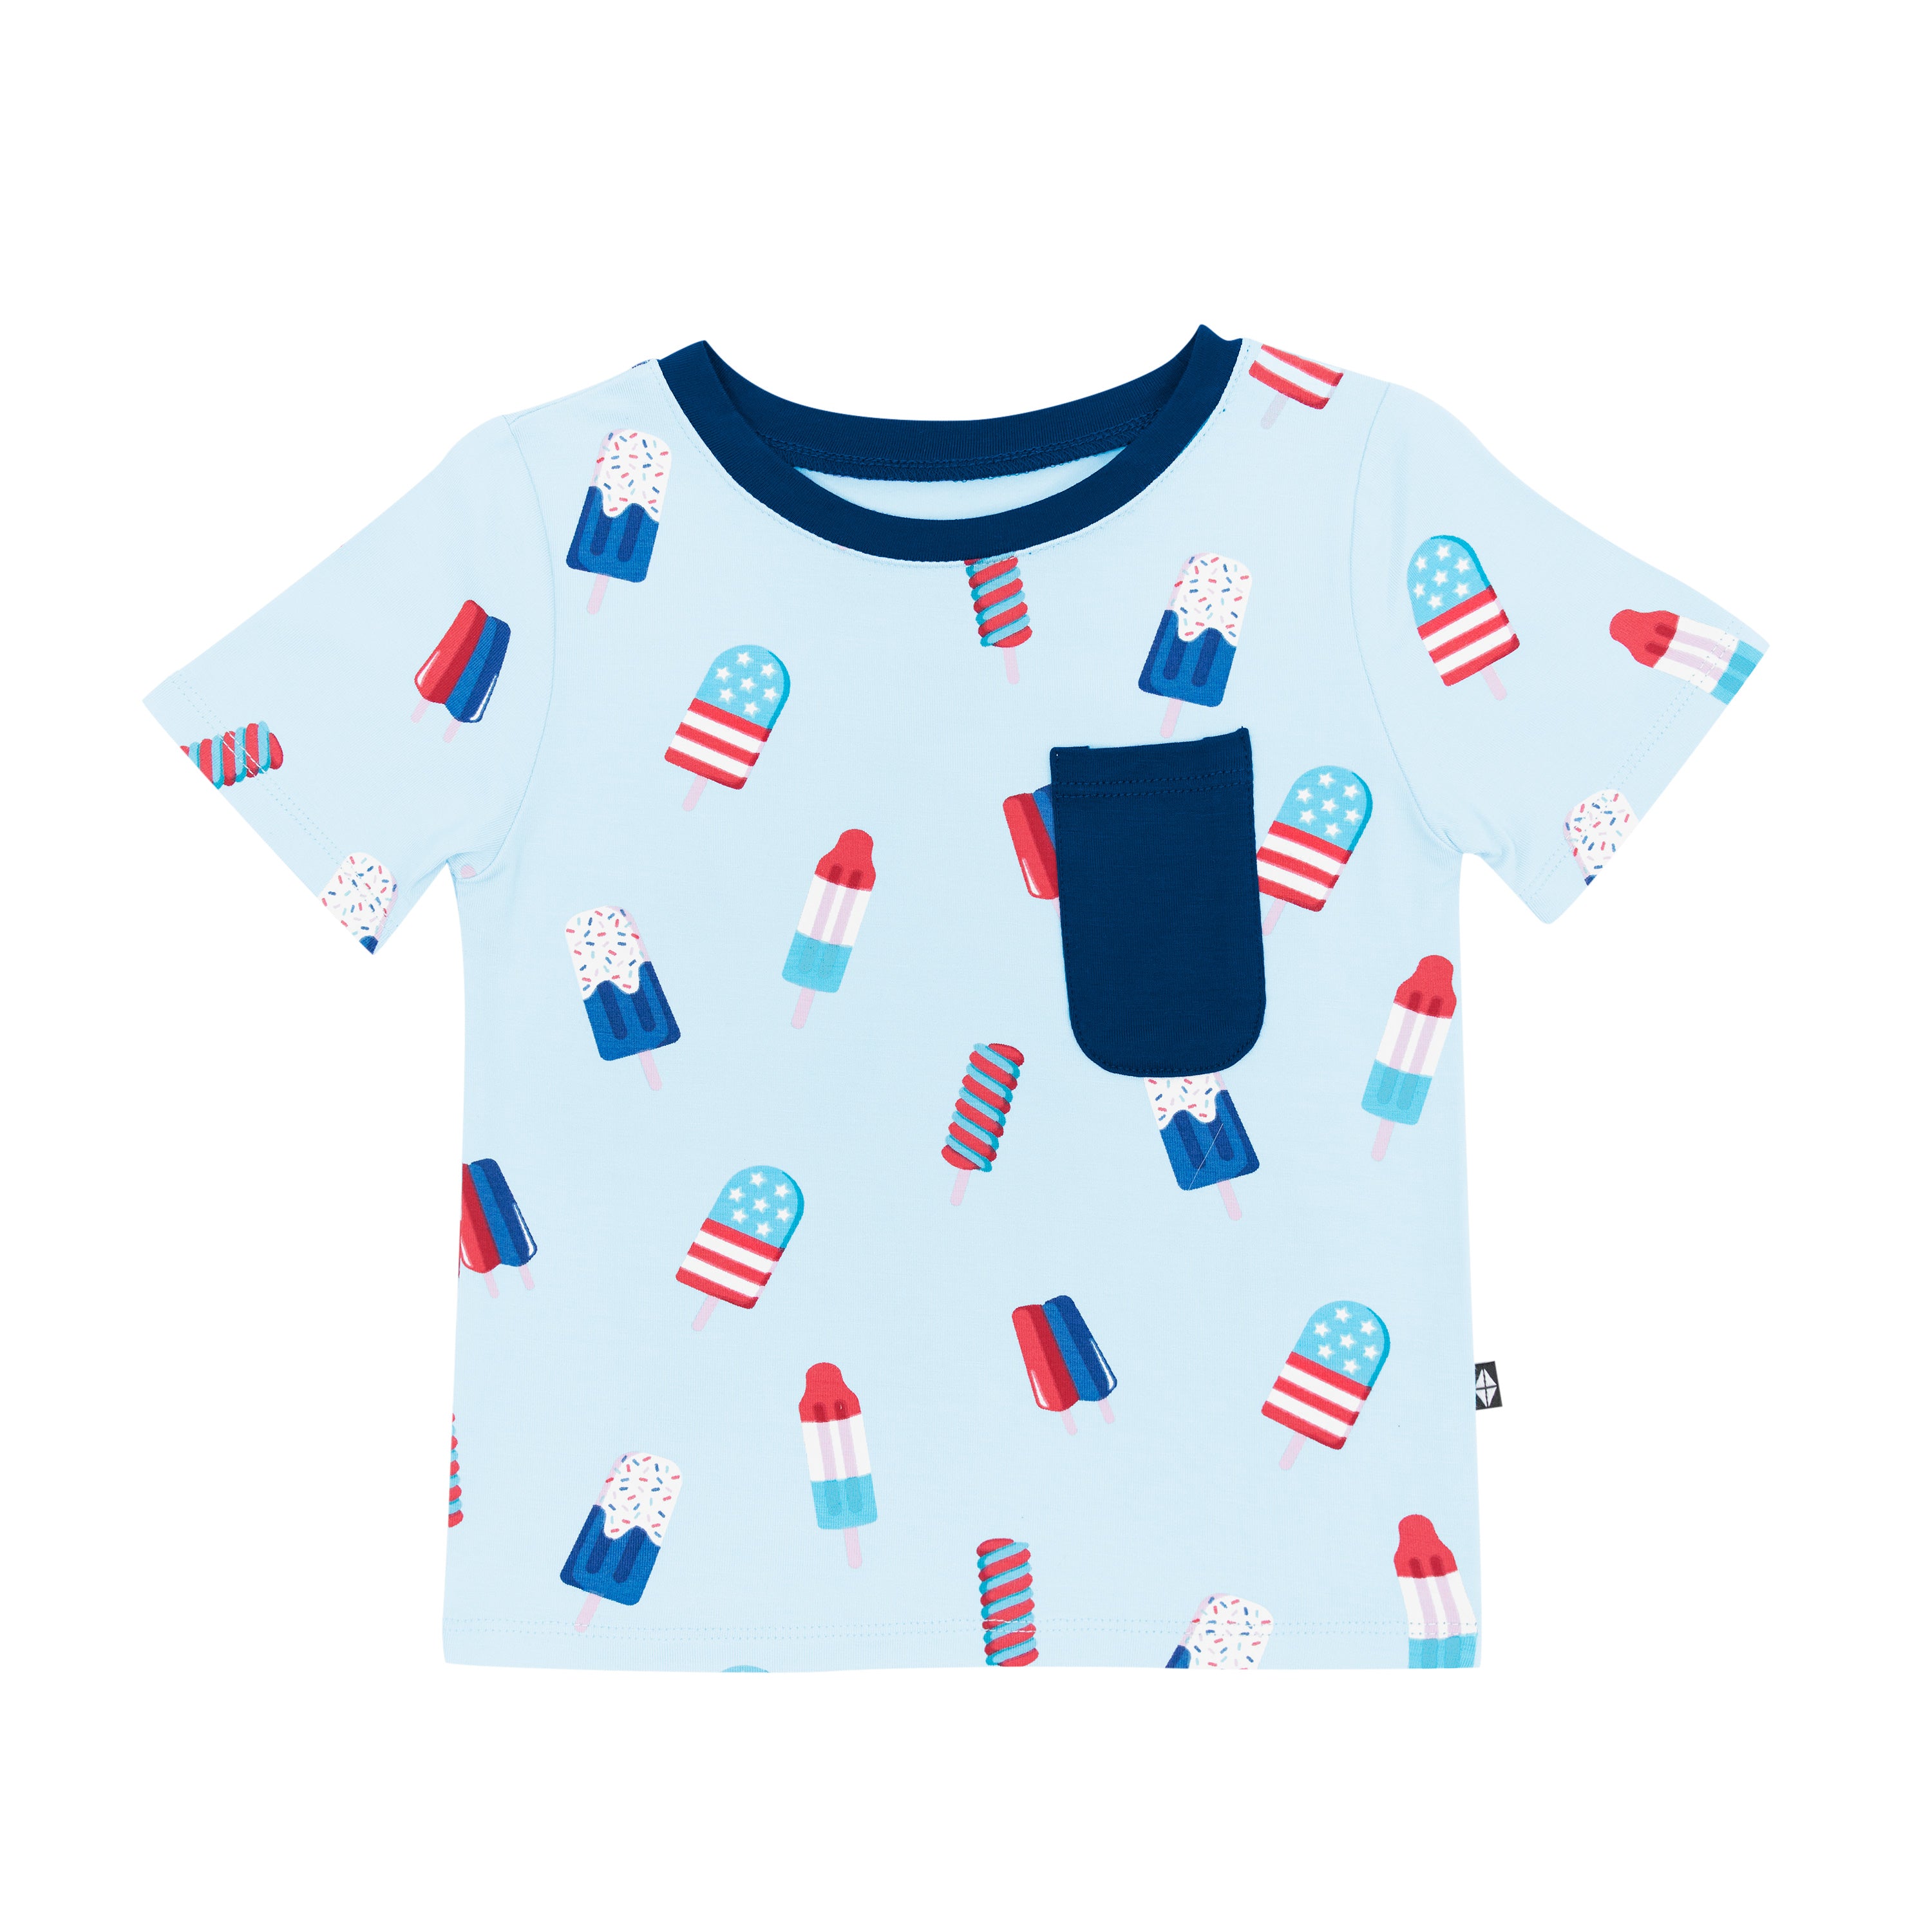 Toddler Crew Neck Tee in Popsicle